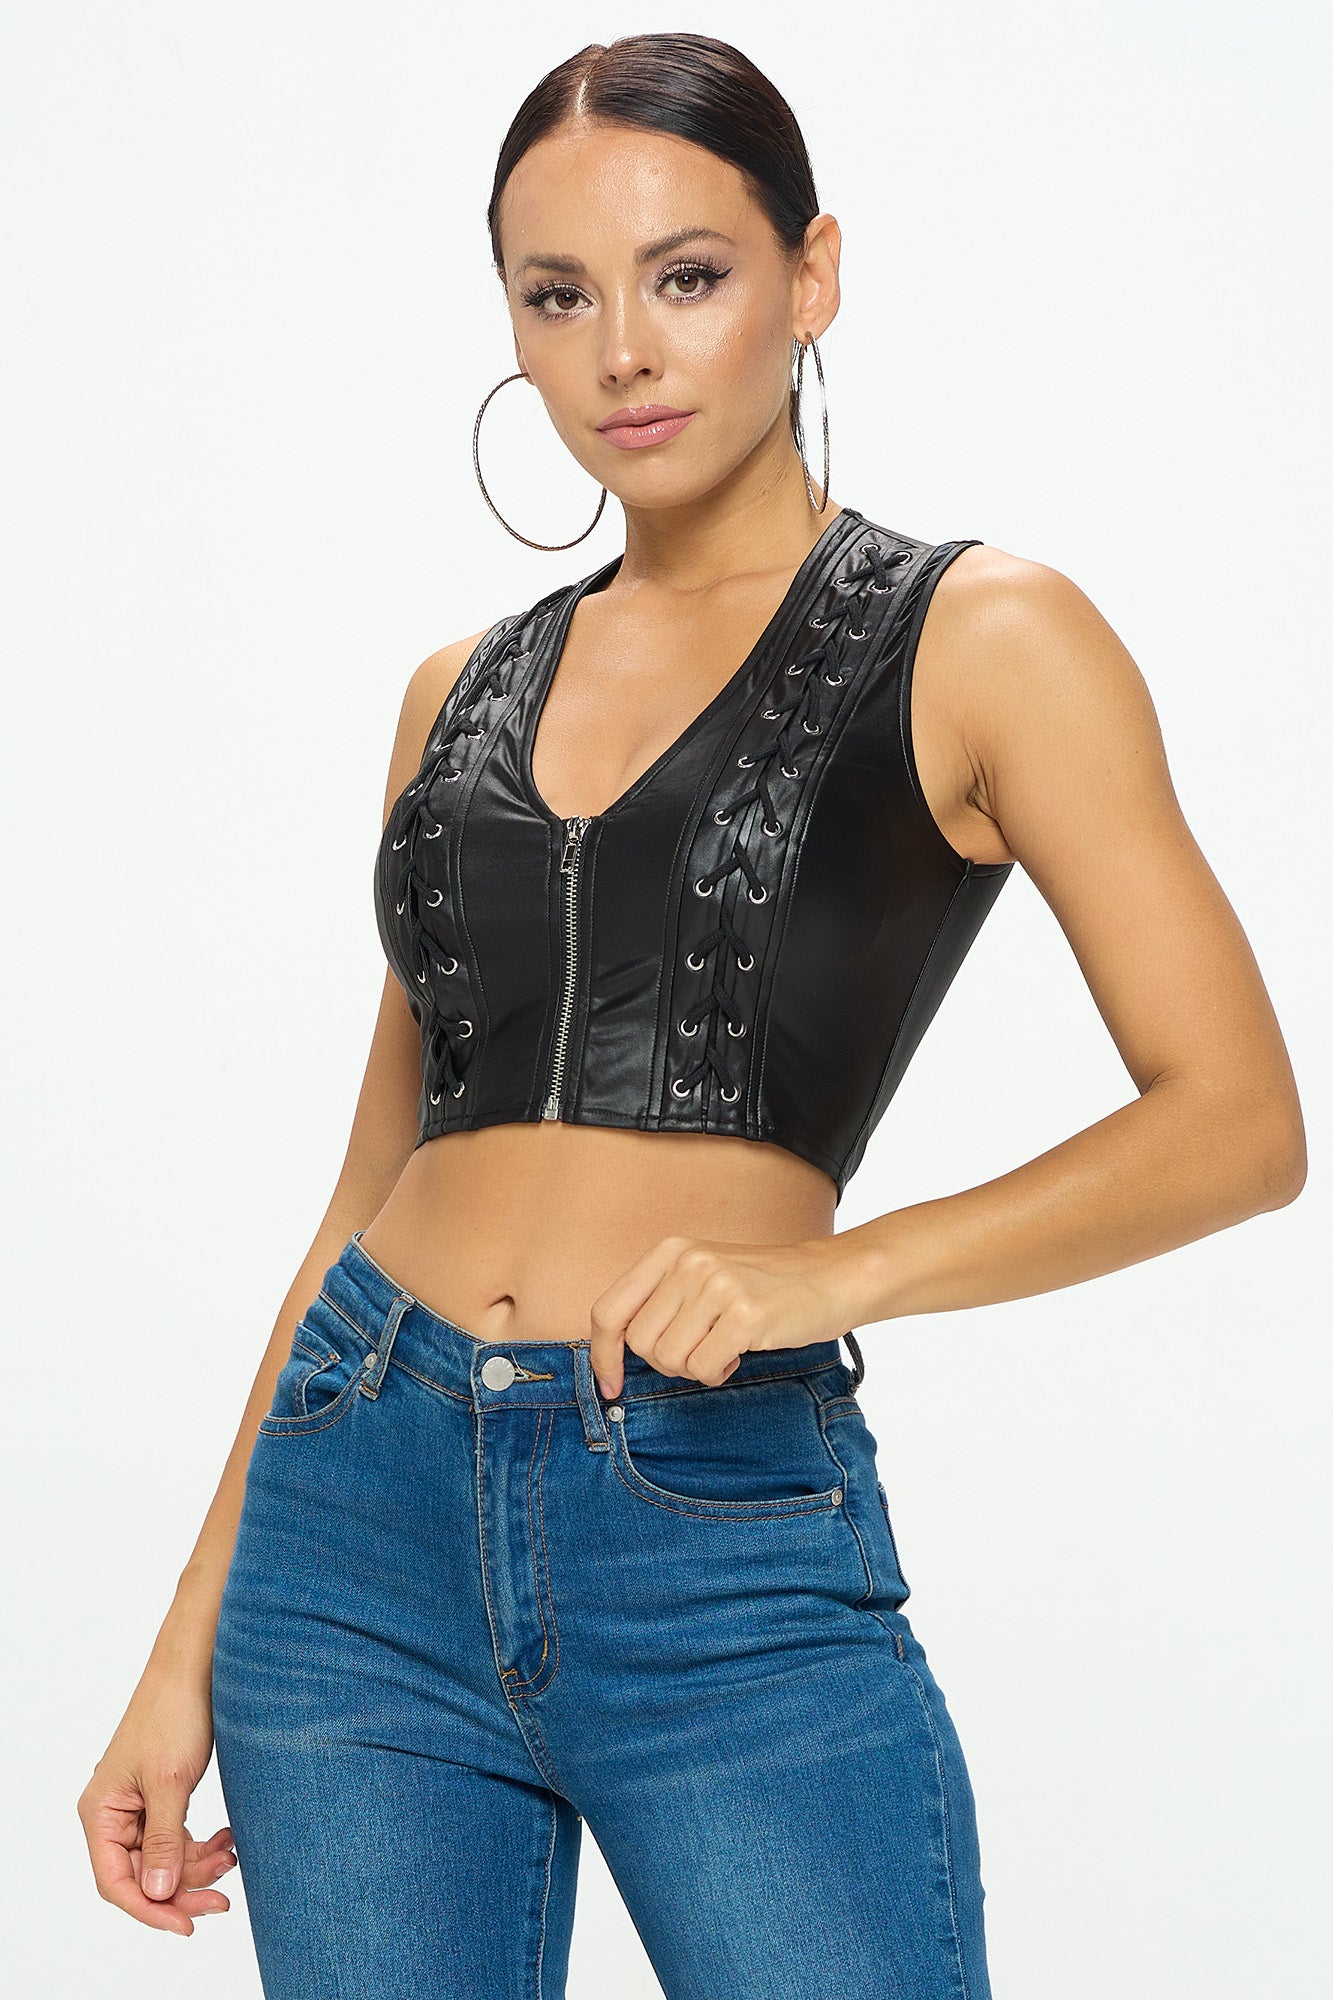 LACE-UP DETAIL SLEEVELESS CROP TOP